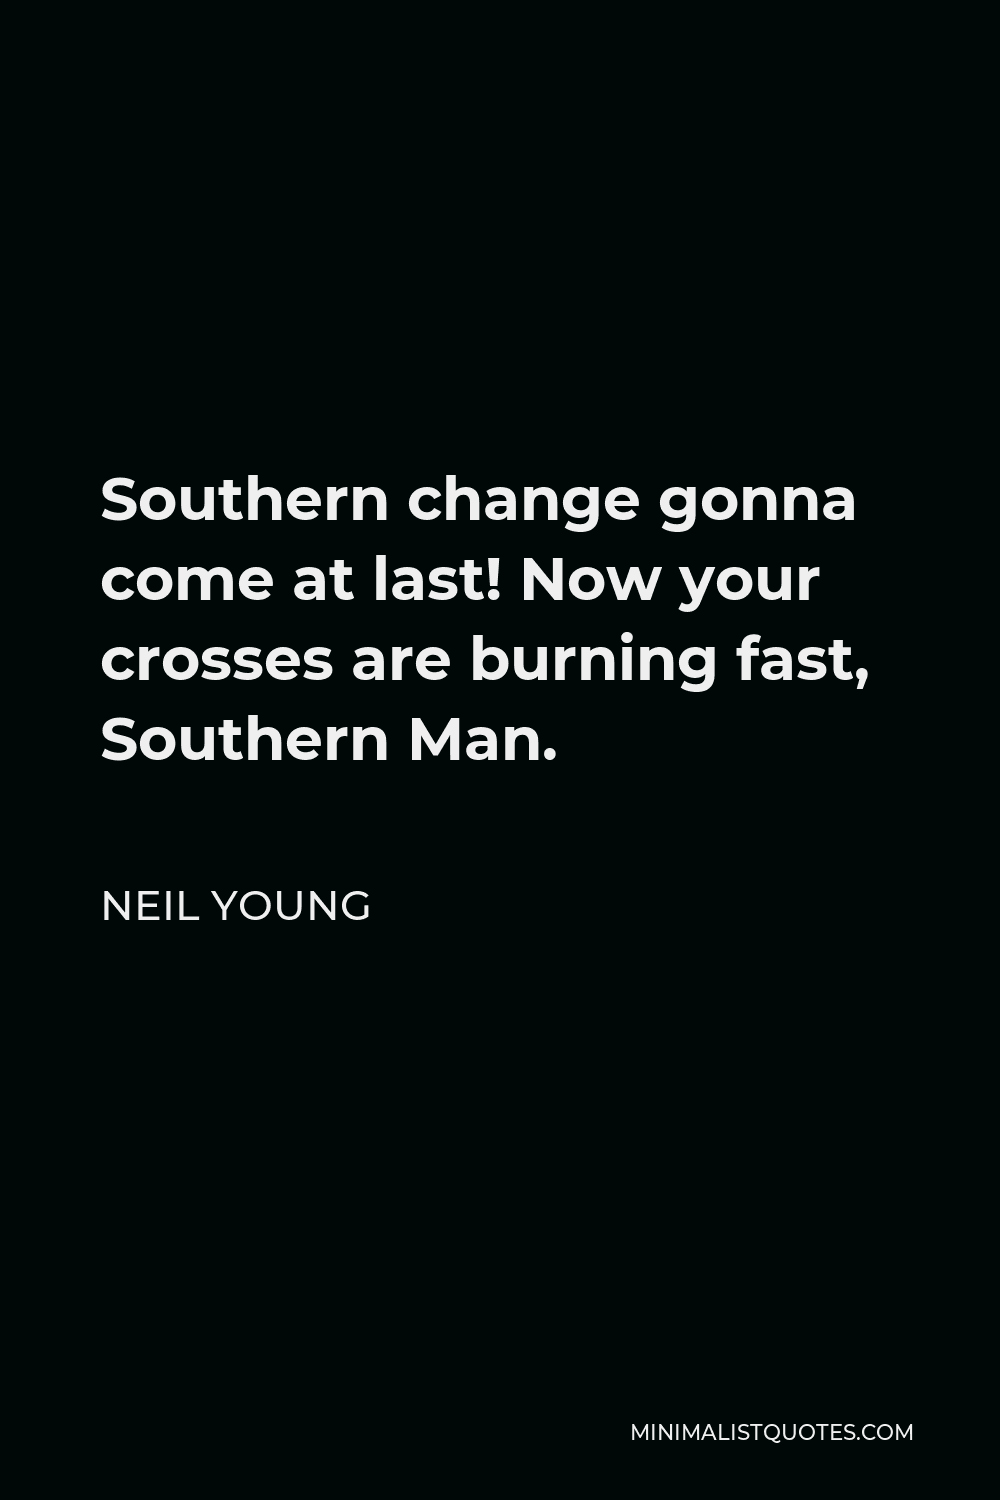 Neil Young Quote - Southern change gonna come at last! Now your crosses are burning fast, Southern Man.